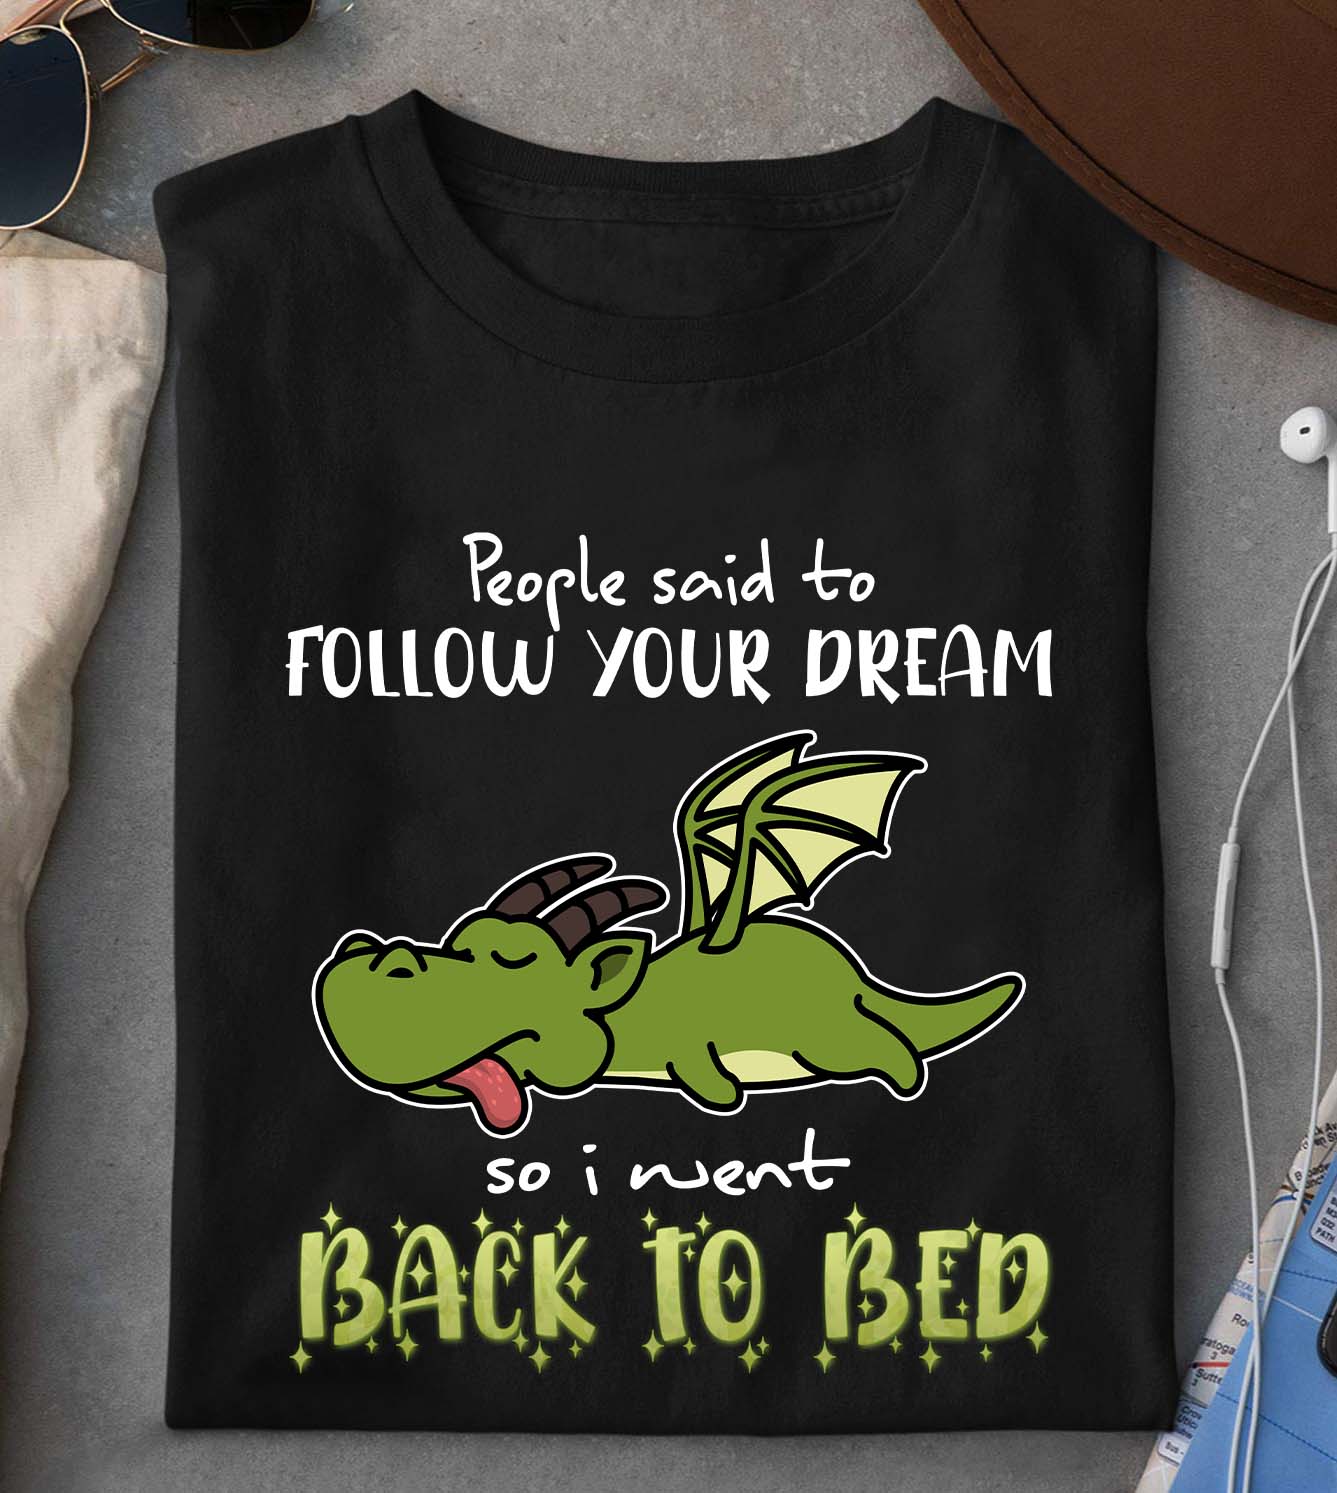 People said to follow your dream so i went back to bed – Sleepy dragon